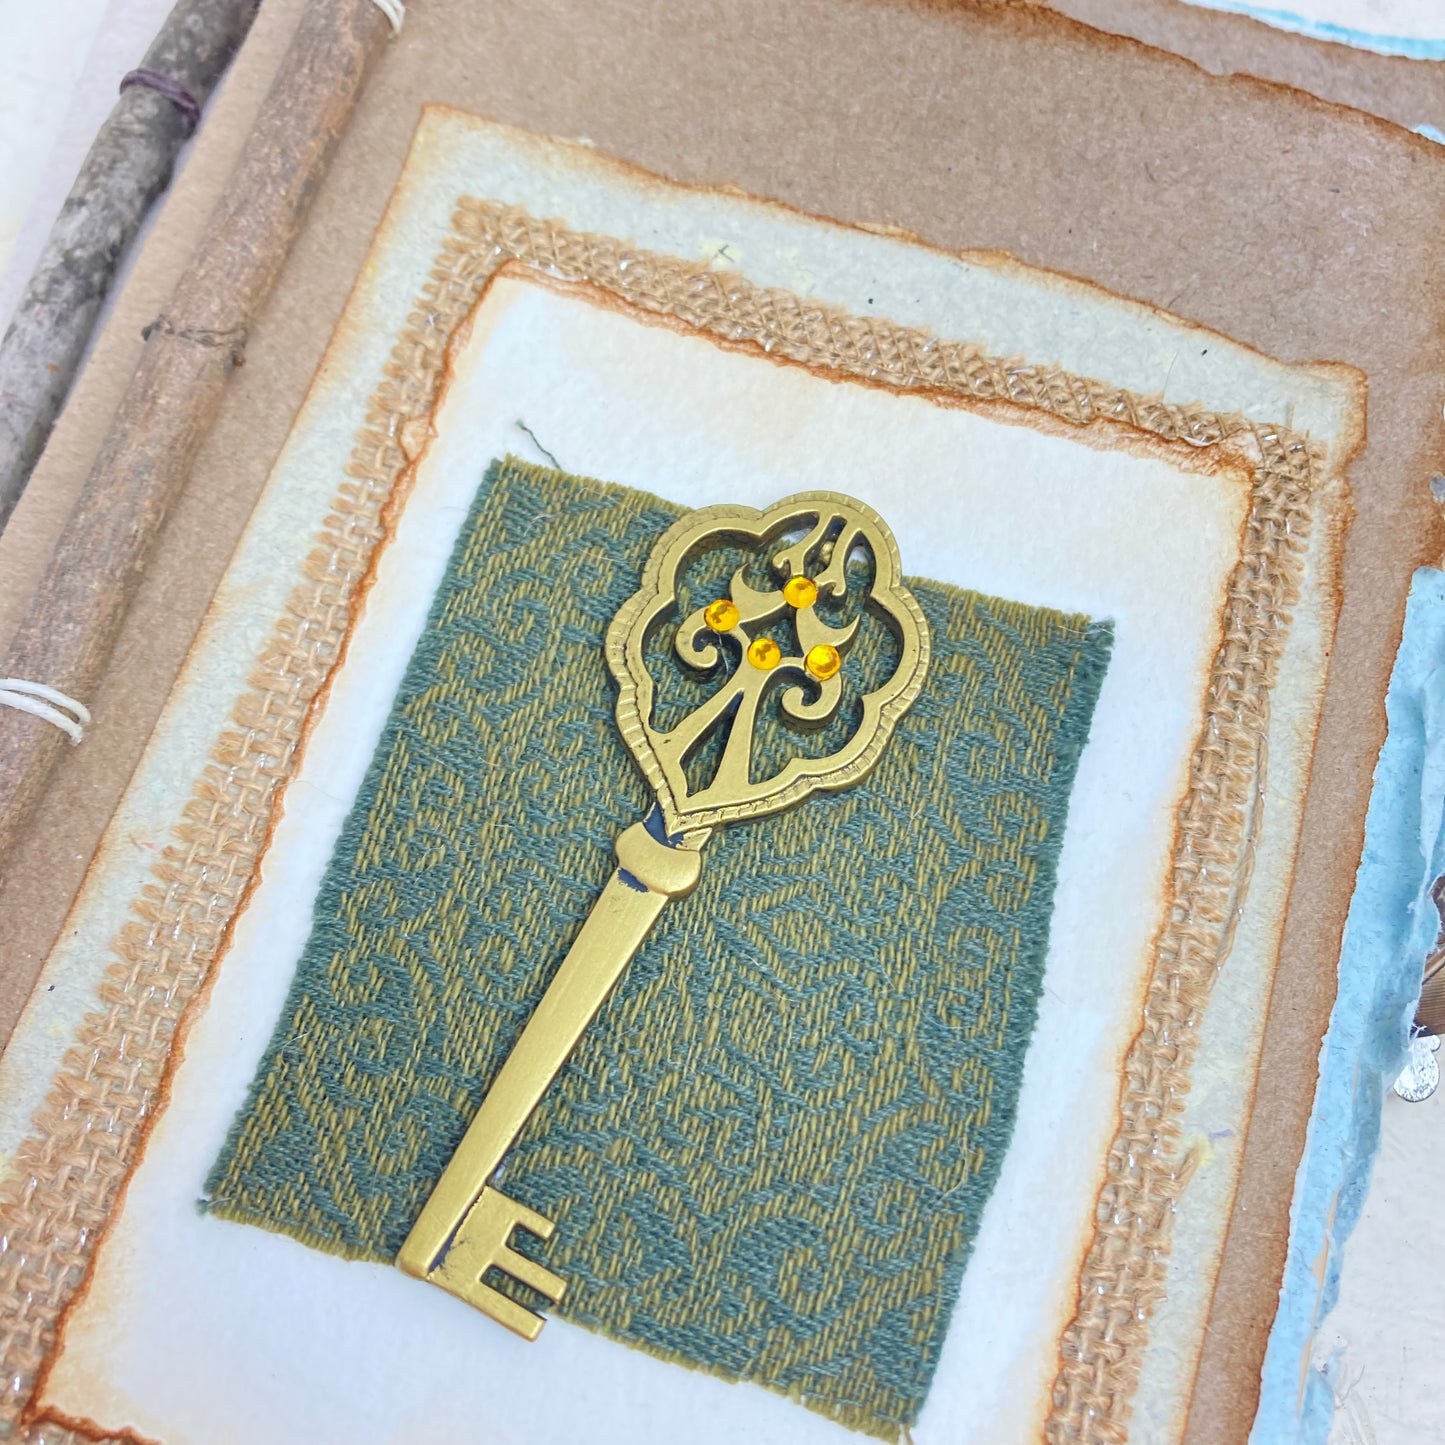 Art Journal with Handmade Paper Cover featuring a Vintage-style Key, Variety of Mixed Media Pages, Hand Sewn Binding with Stick Inserted